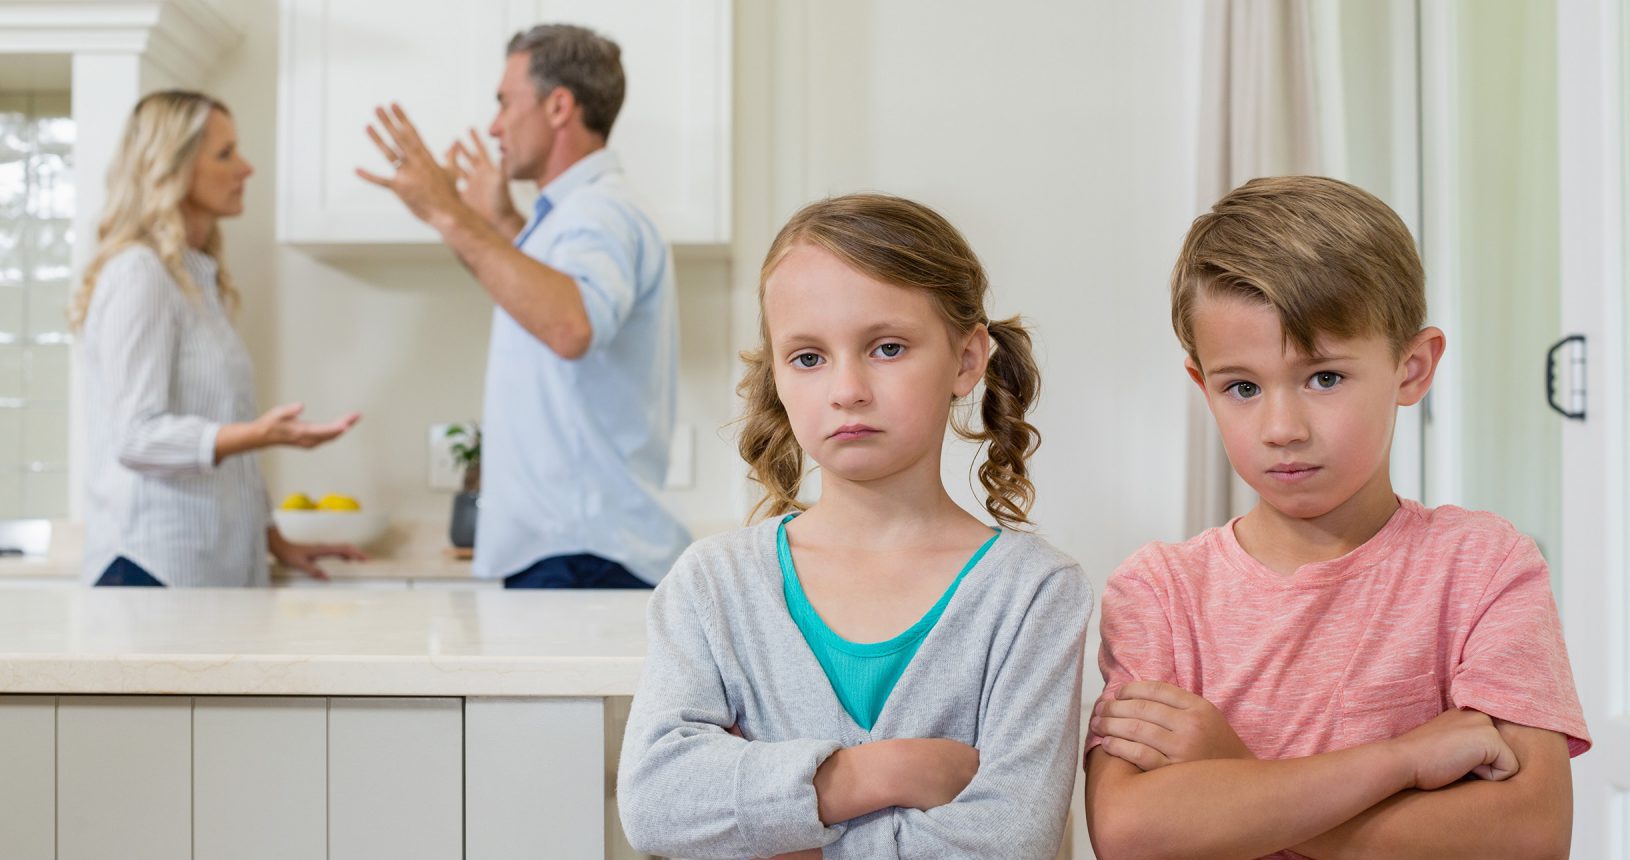 Sad sibling standing with arms crossed while parents arguing each other